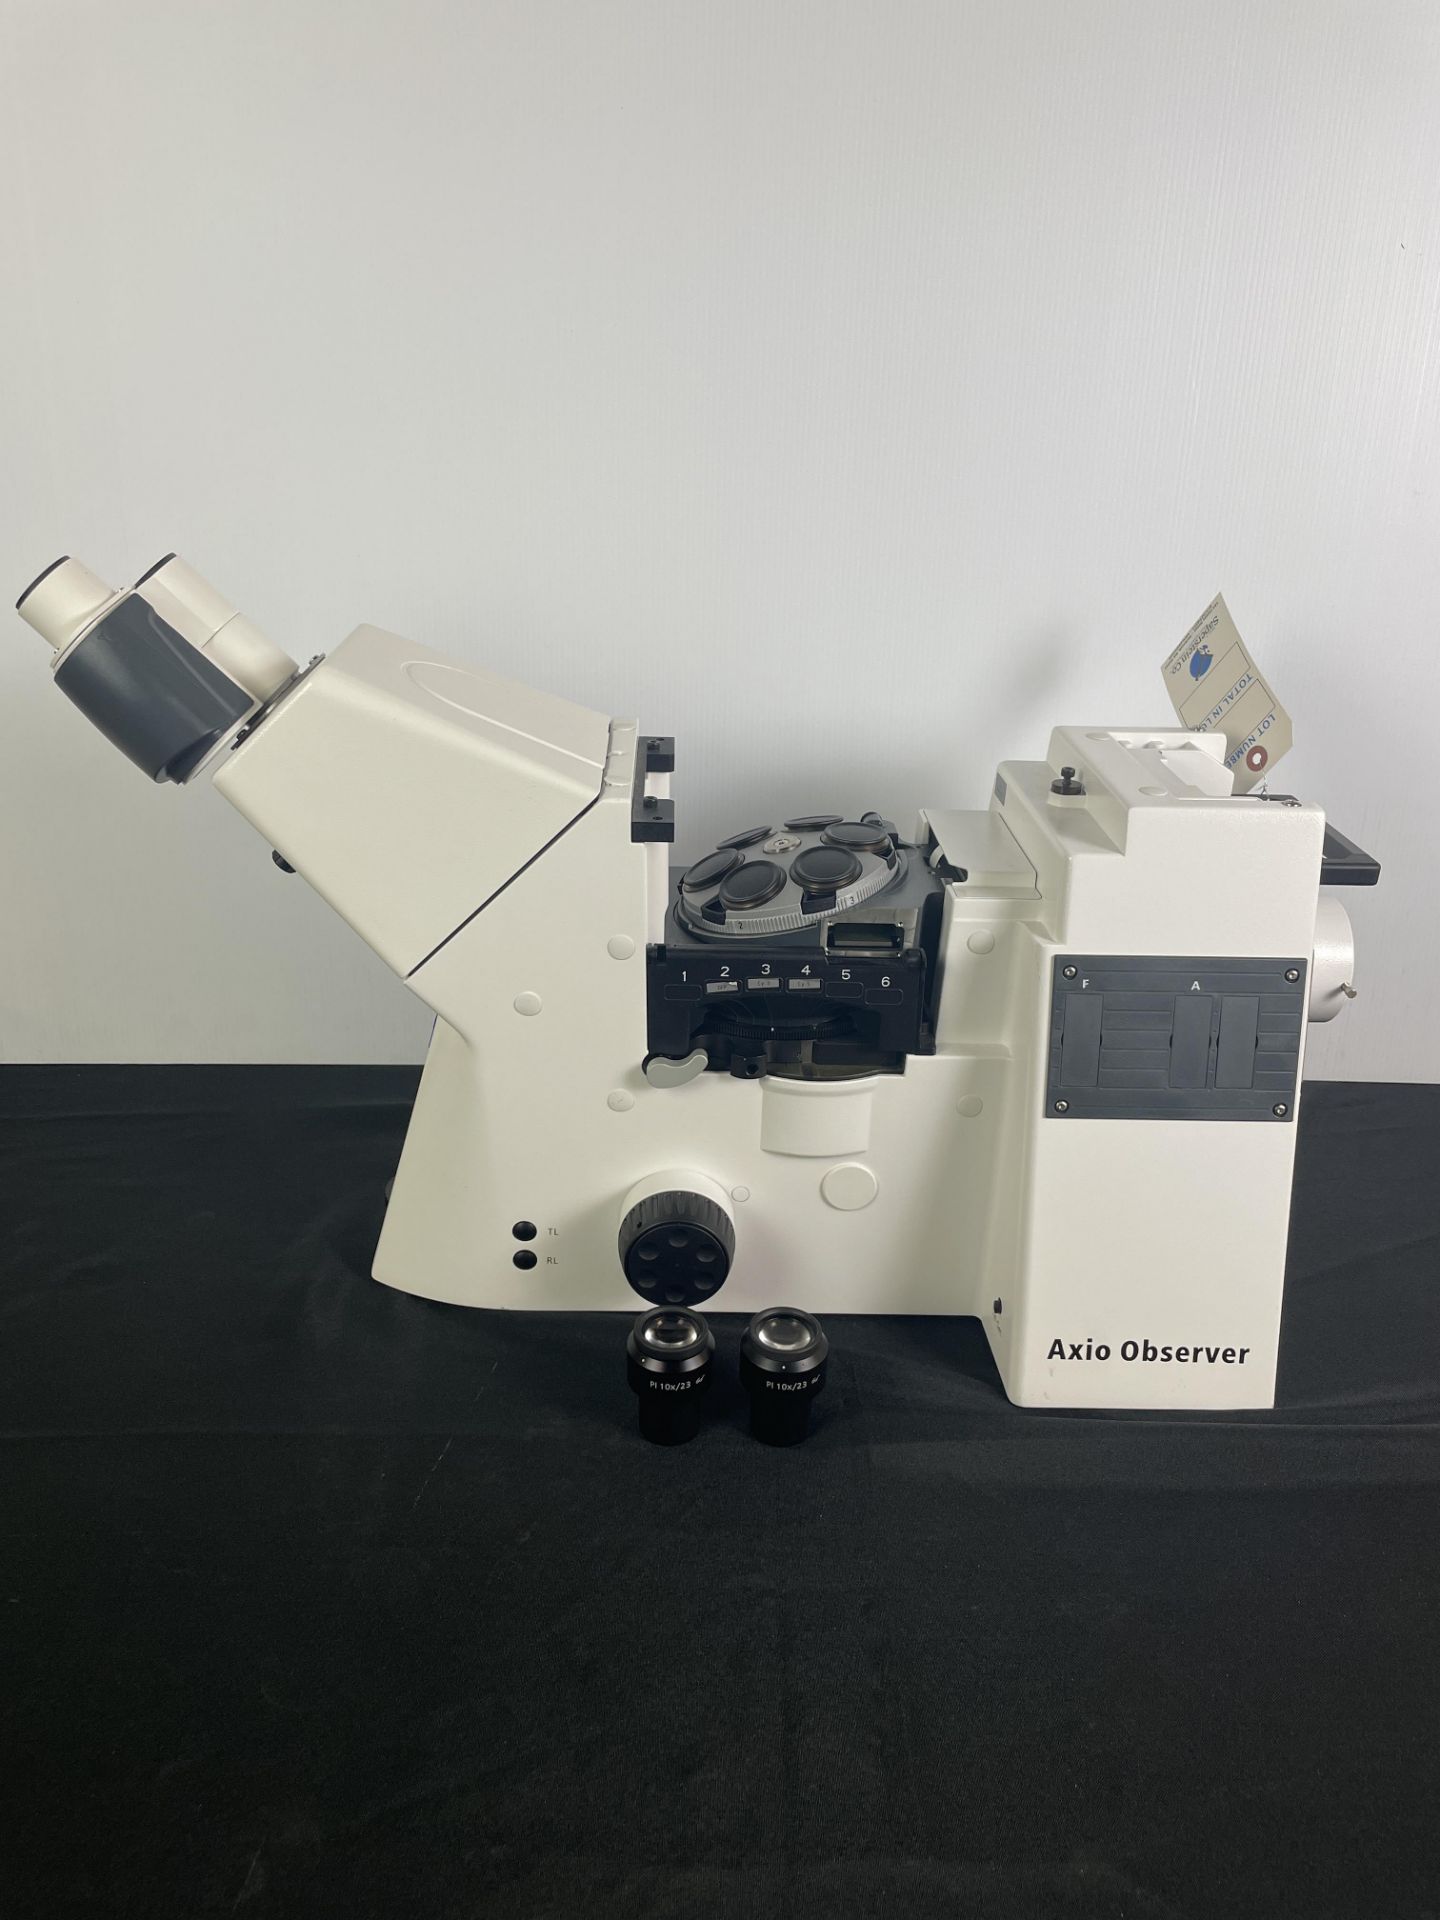 Zeiss Axio Observer 3 Inverted Microscope w/(4) Optics & (2) Zeiss Eyepieces #PI 10x/23 S/N: 386000